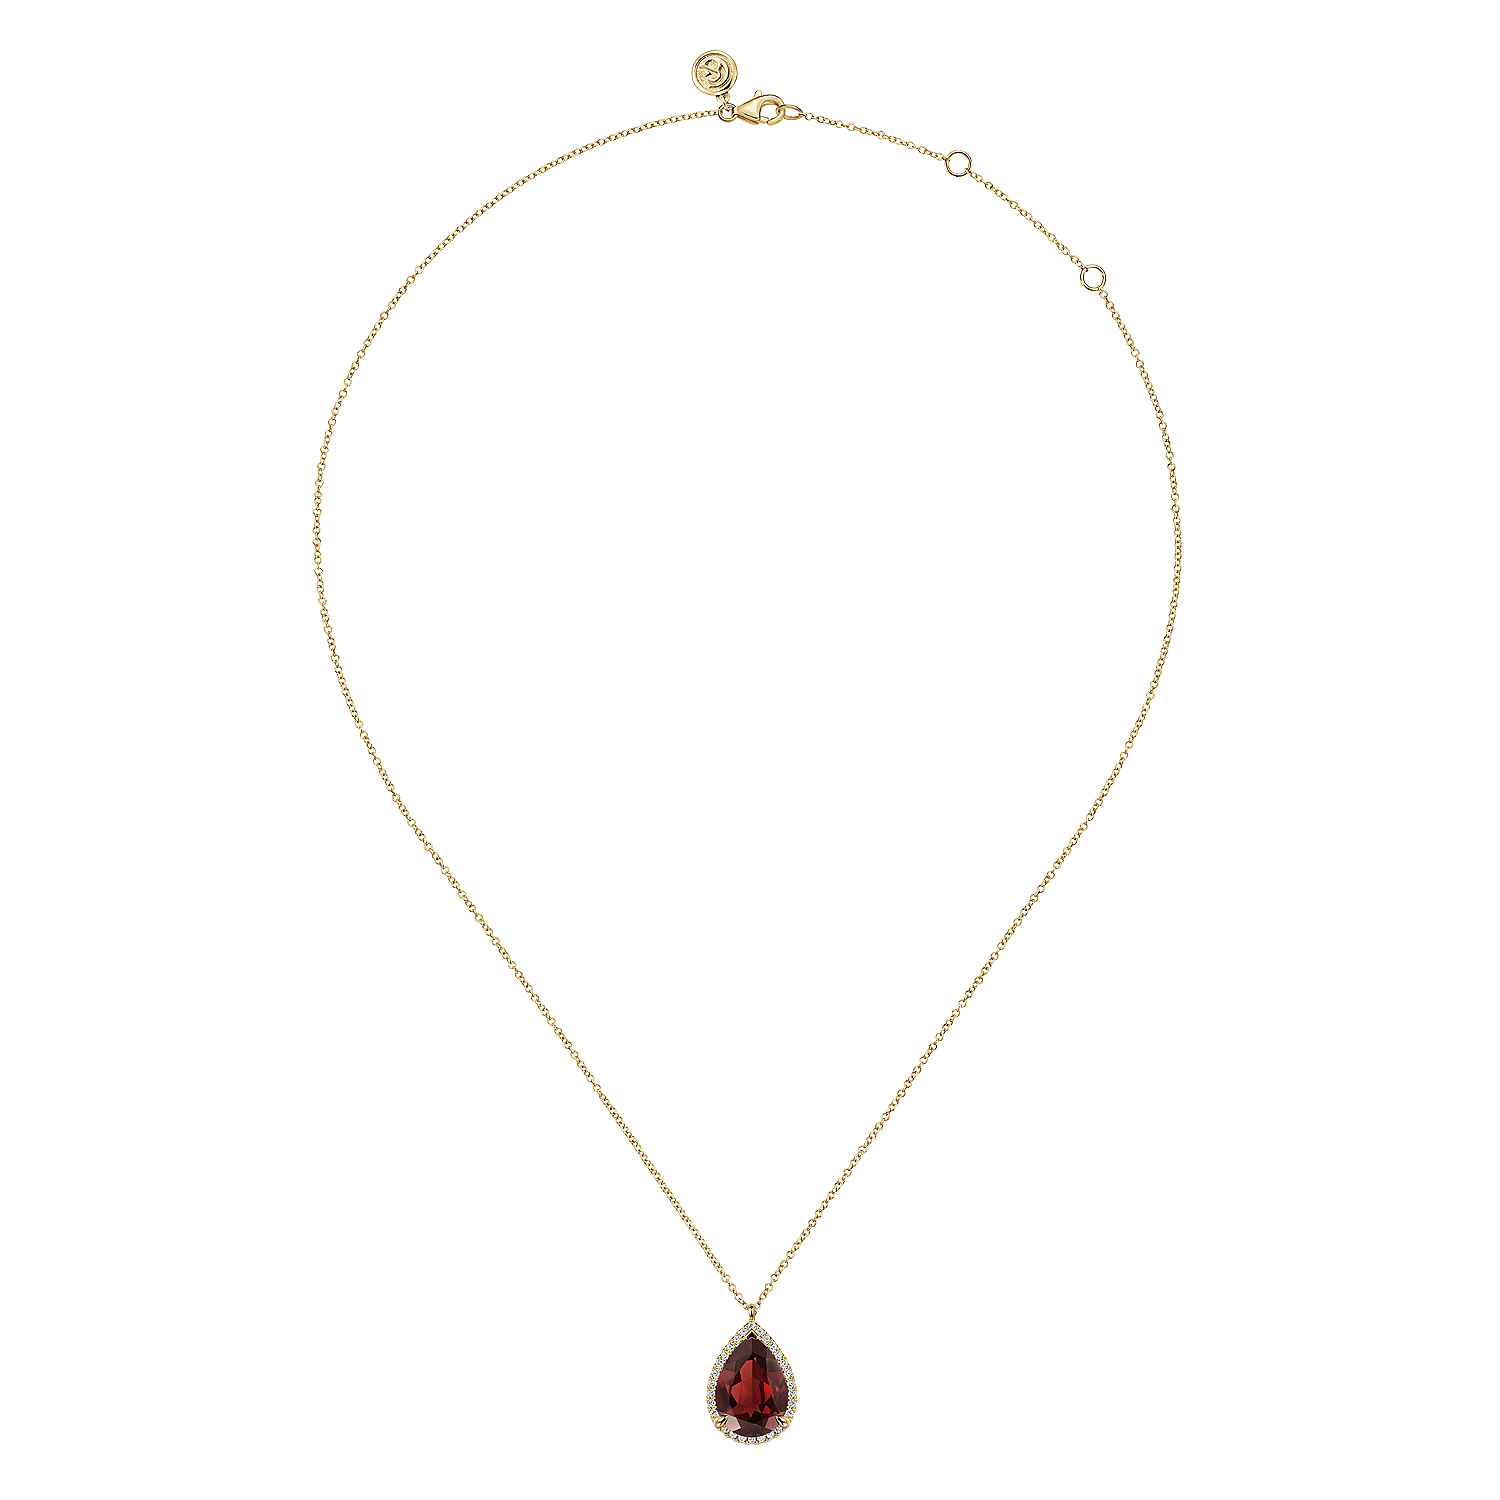 14K Yellow Gold Diamond and Flat Pear Shape Garnet Necklace With Flower Pattern J-Back